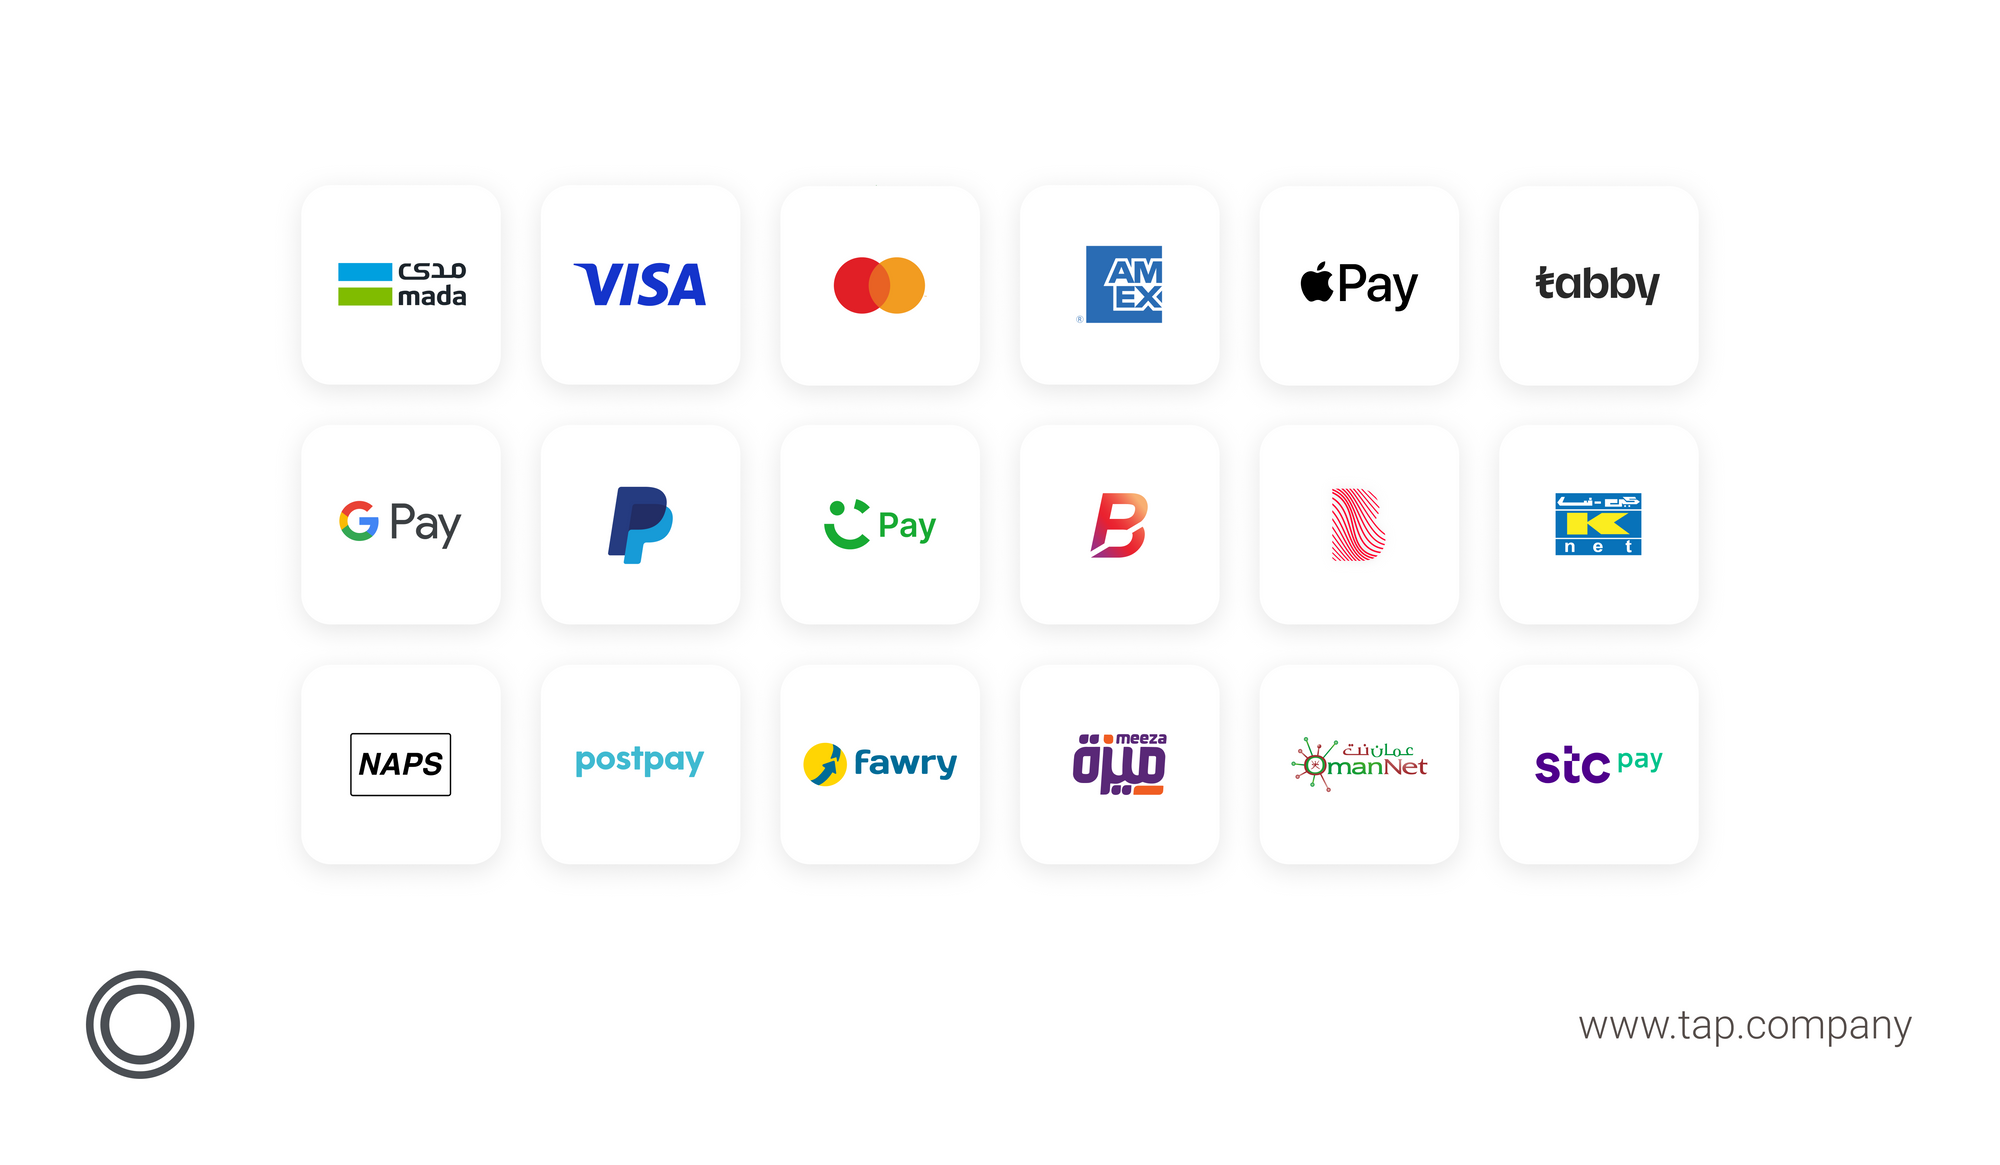 Some of the popular payment methods across MENA